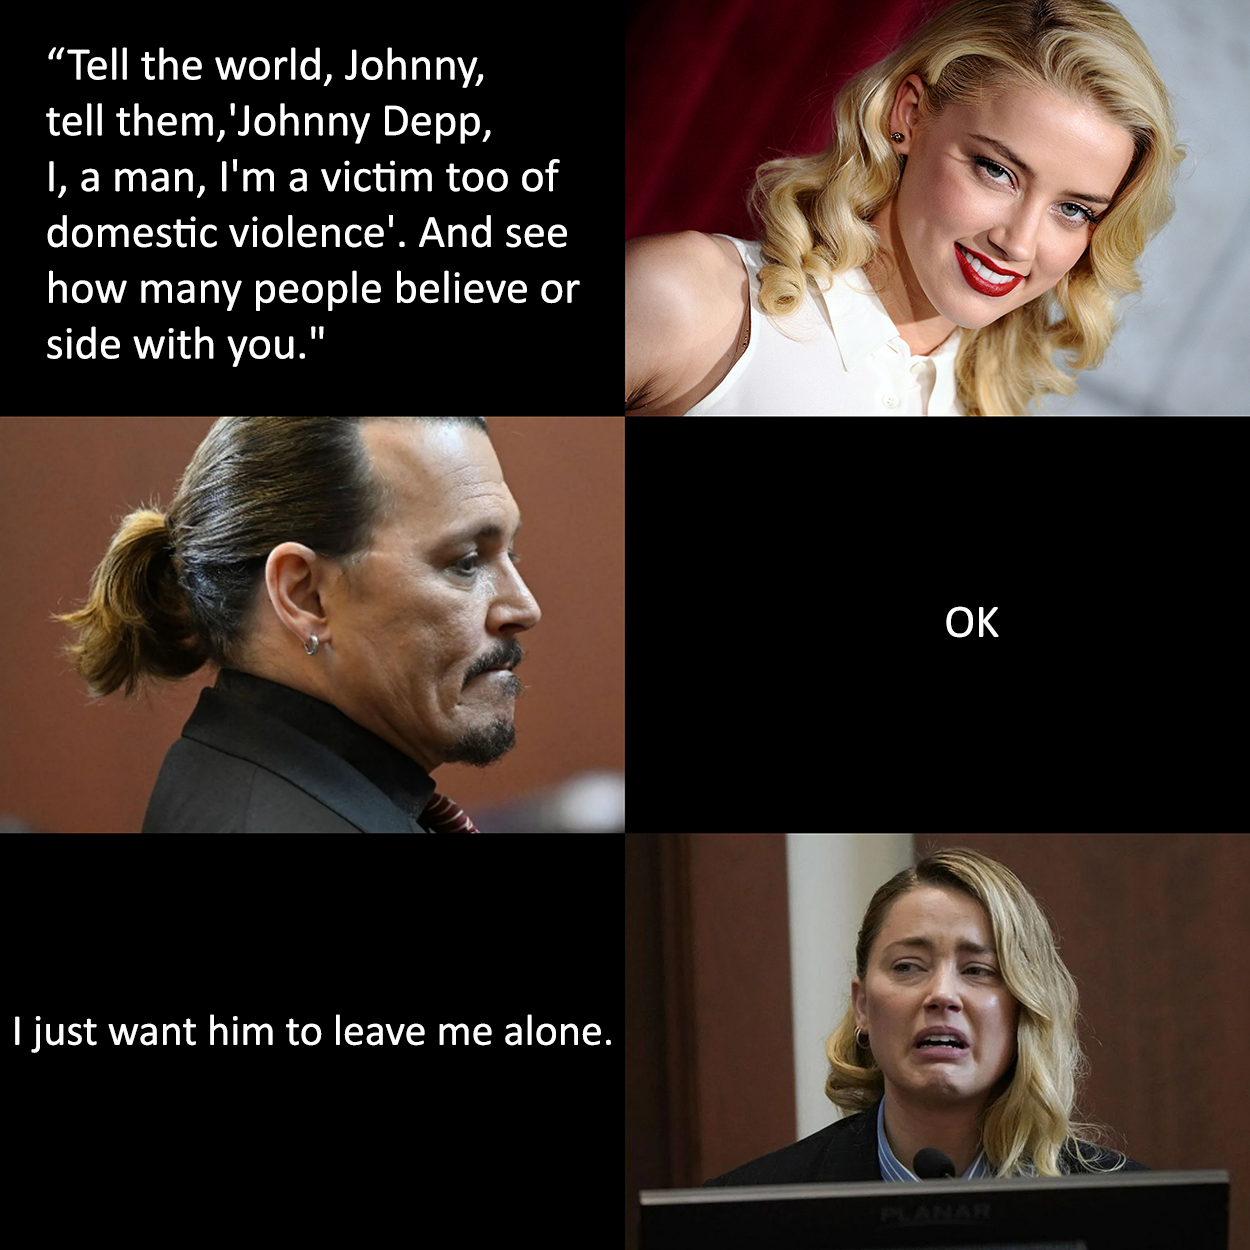 dank memes - amber heard crying face - "Tell the world, Johnny, tell them, 'Johnny Depp, I, a man, I'm a victim too of domestic violence'. And see how many people believe or side with you." I just want him to leave me alone. Ok